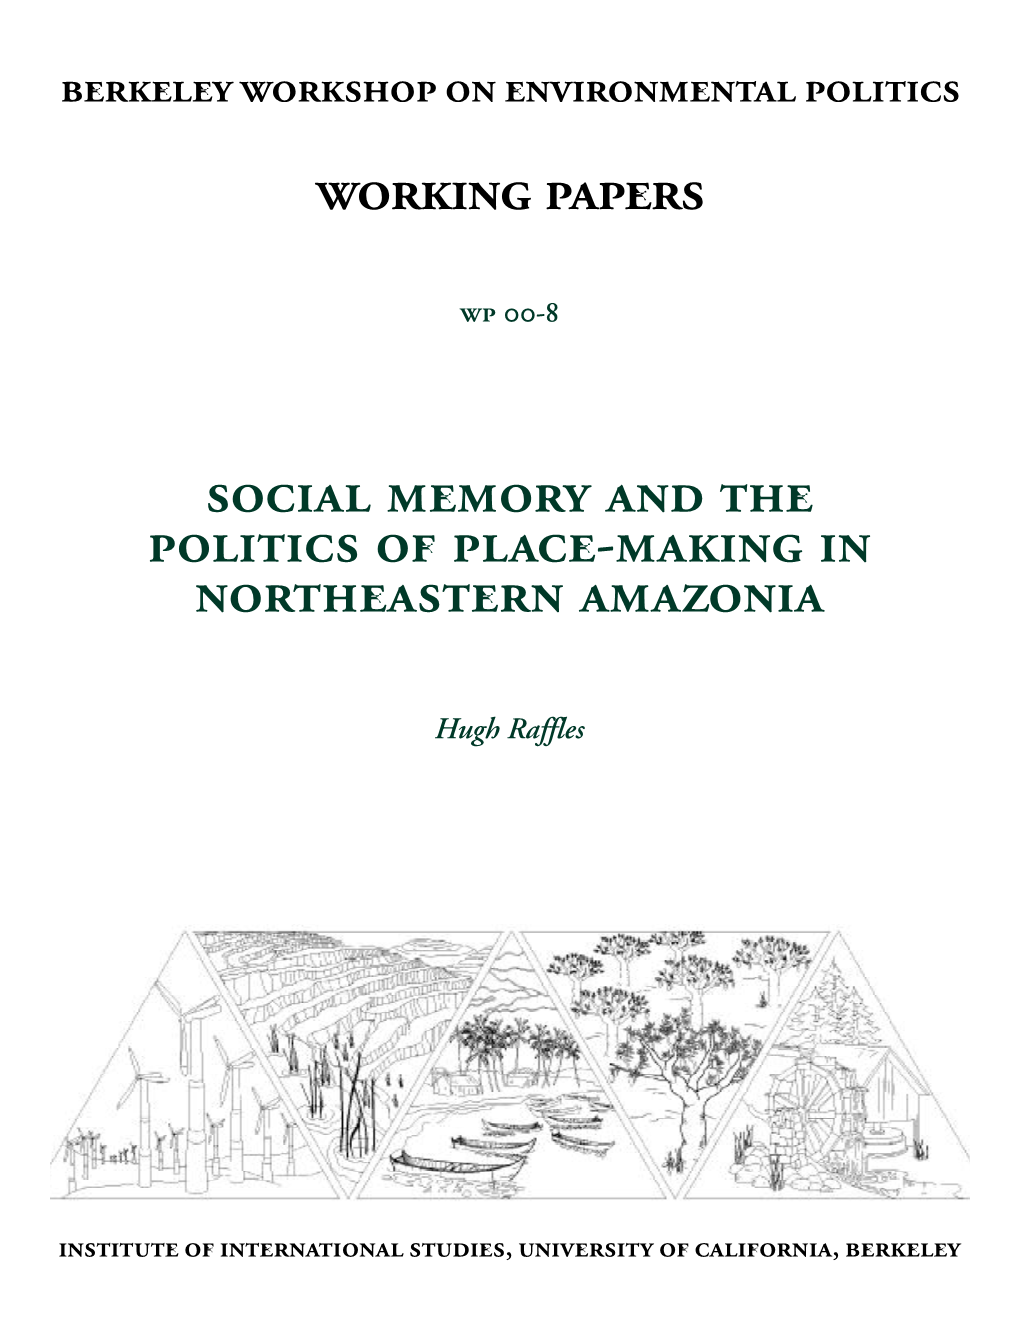 Social Memory and the Politics of Place-Making in Northeastern